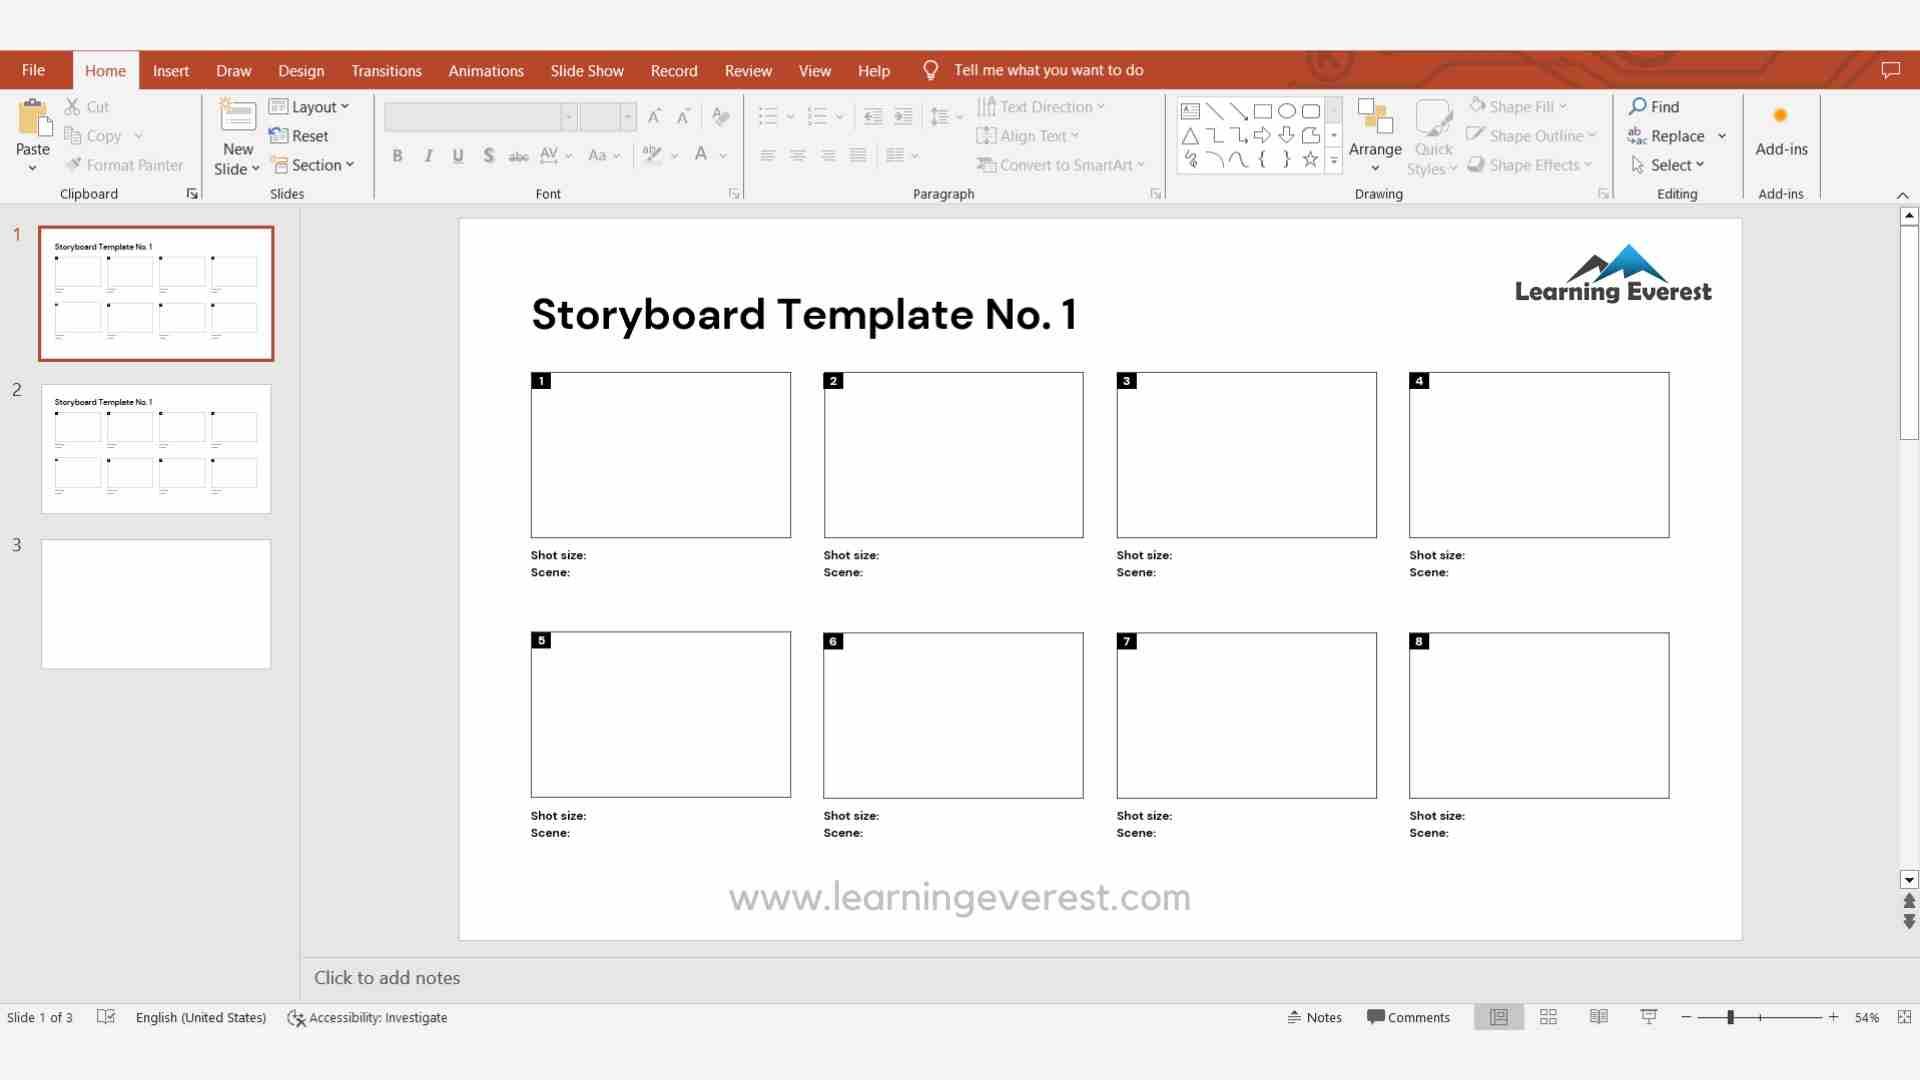 10 Effective Online Training Steps with Storyboard Examples -PowerPoint storyboards